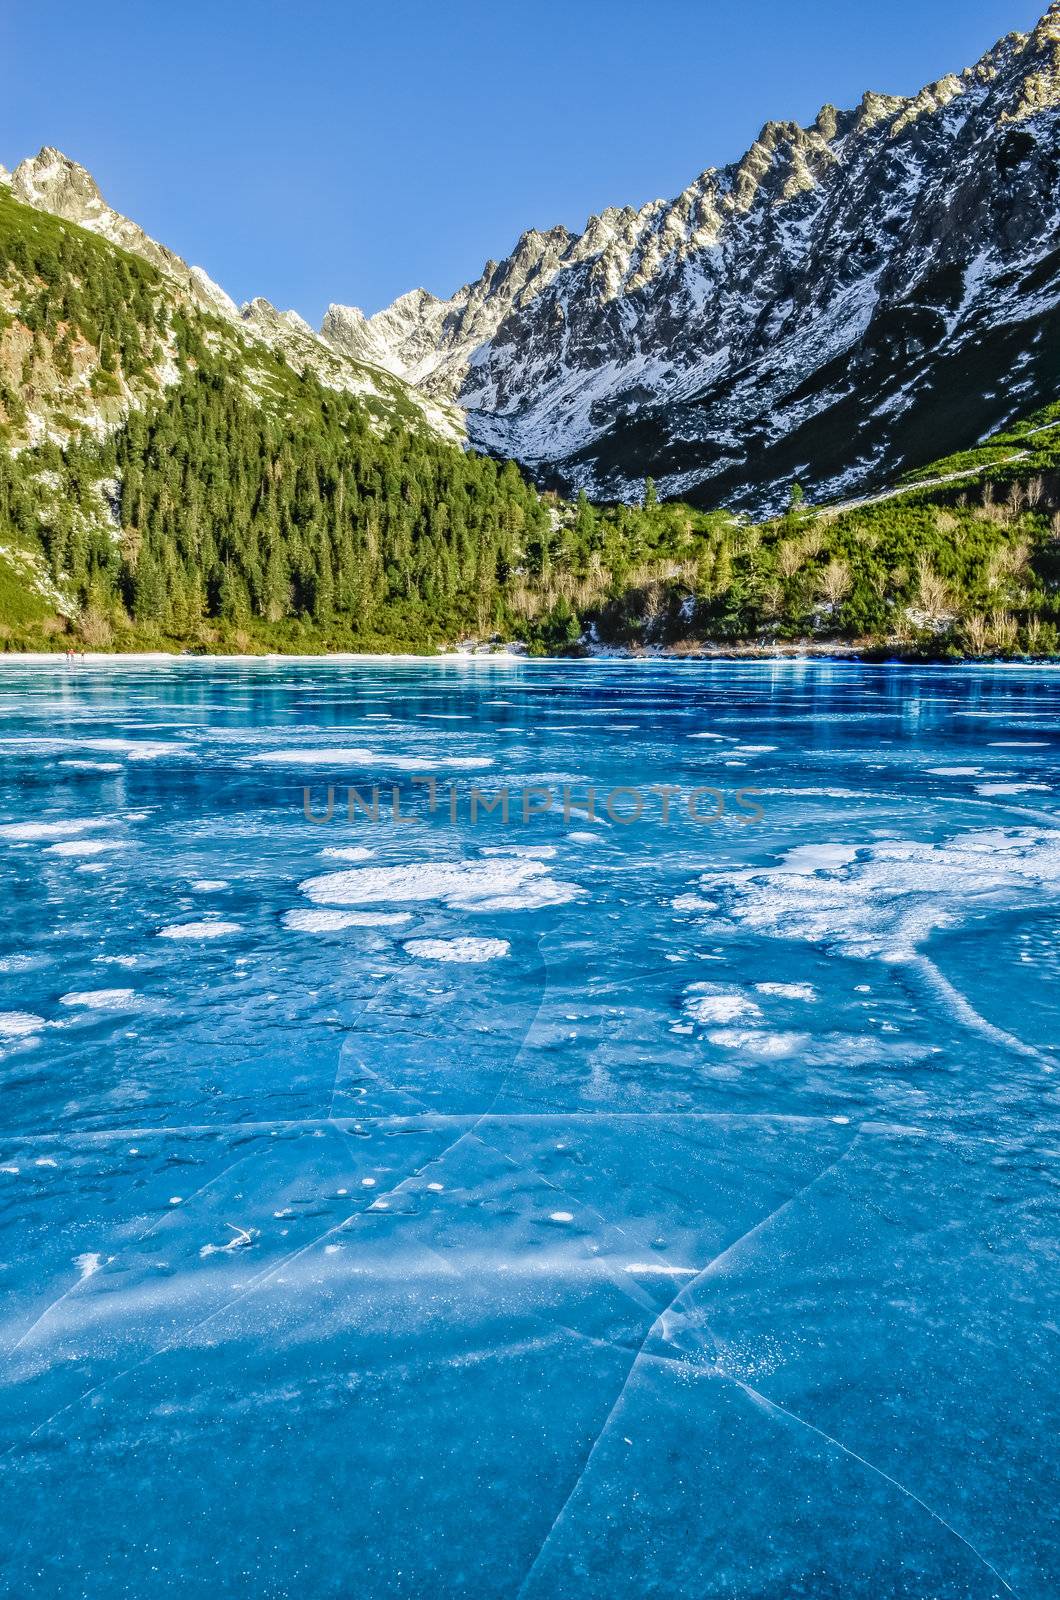 Mountain ice lake with cracked textured ice by martinm303